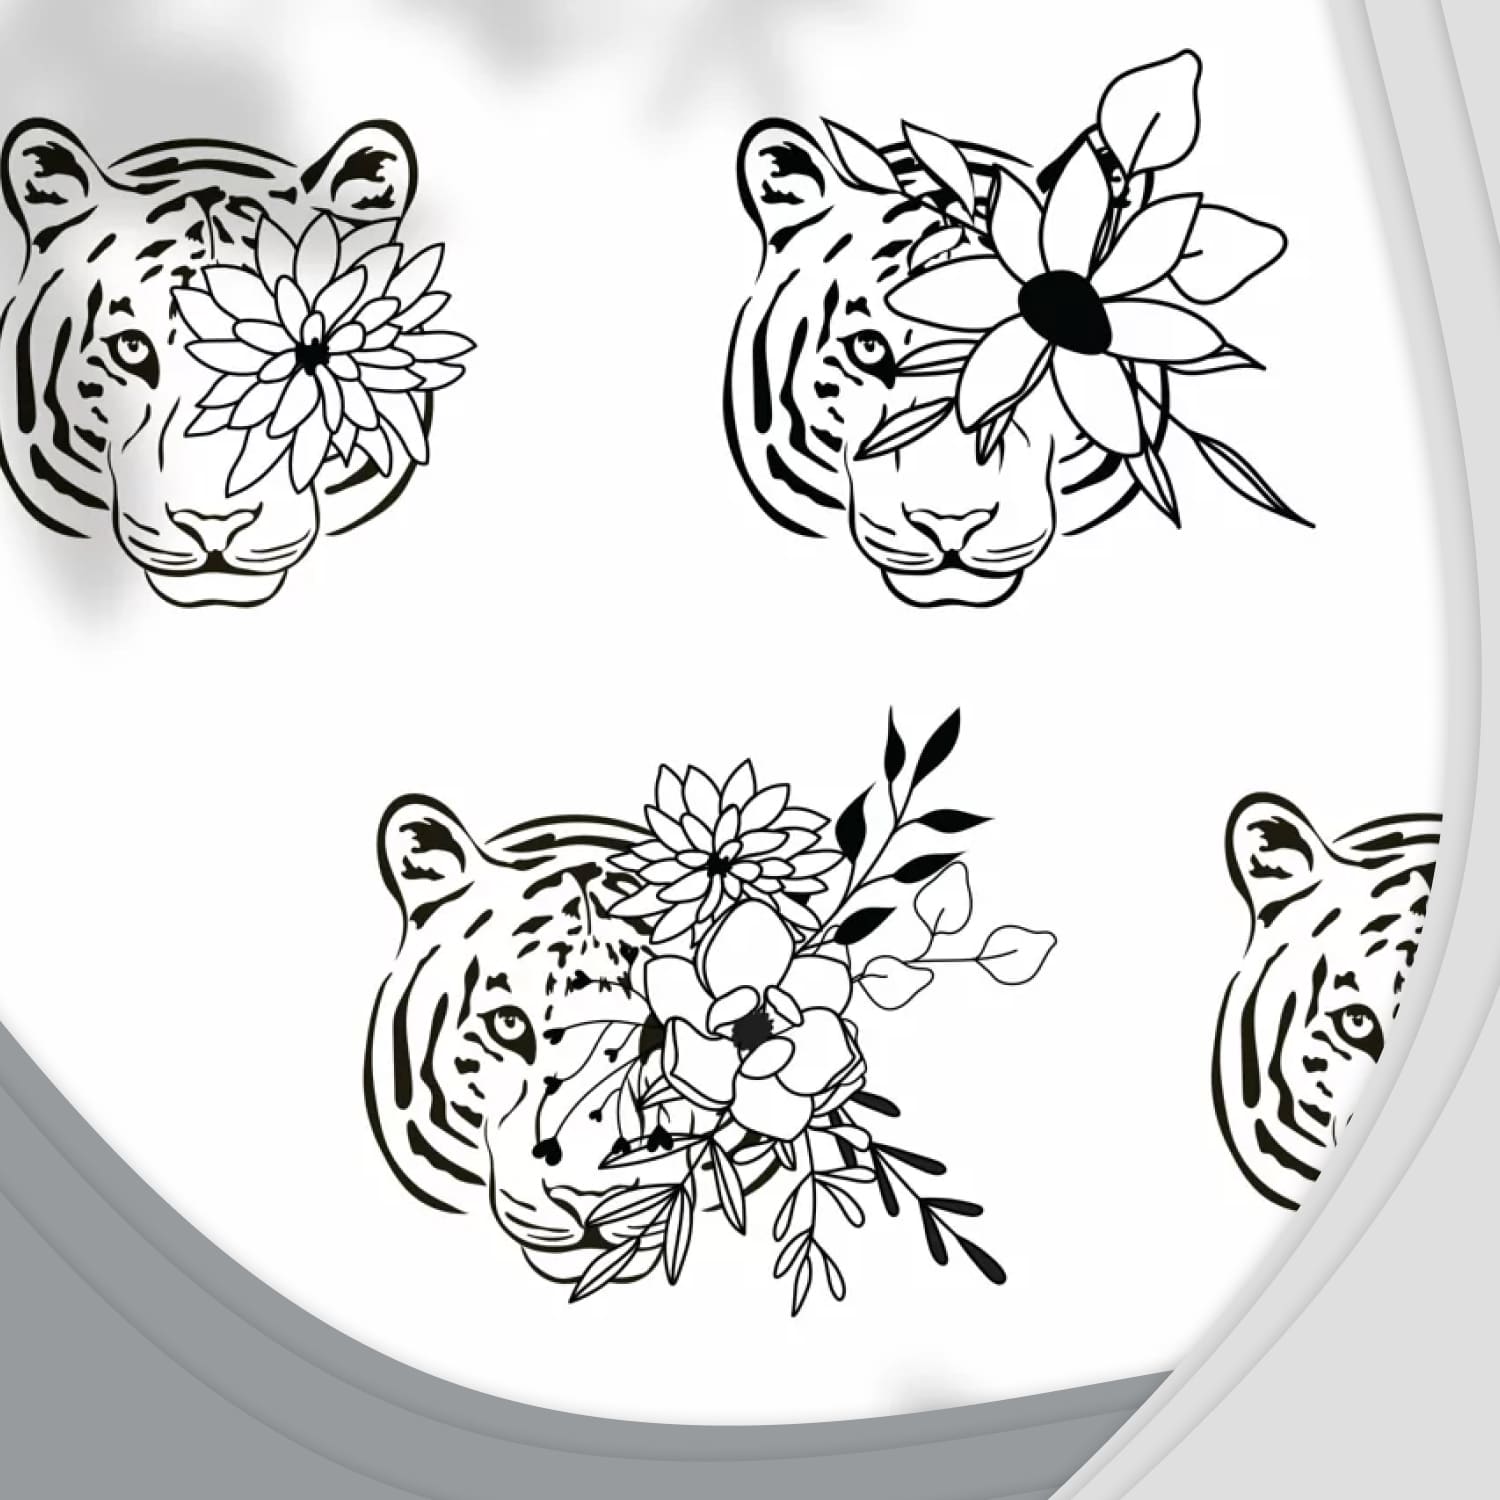 Drawing of a tiger and flowers on a white background.